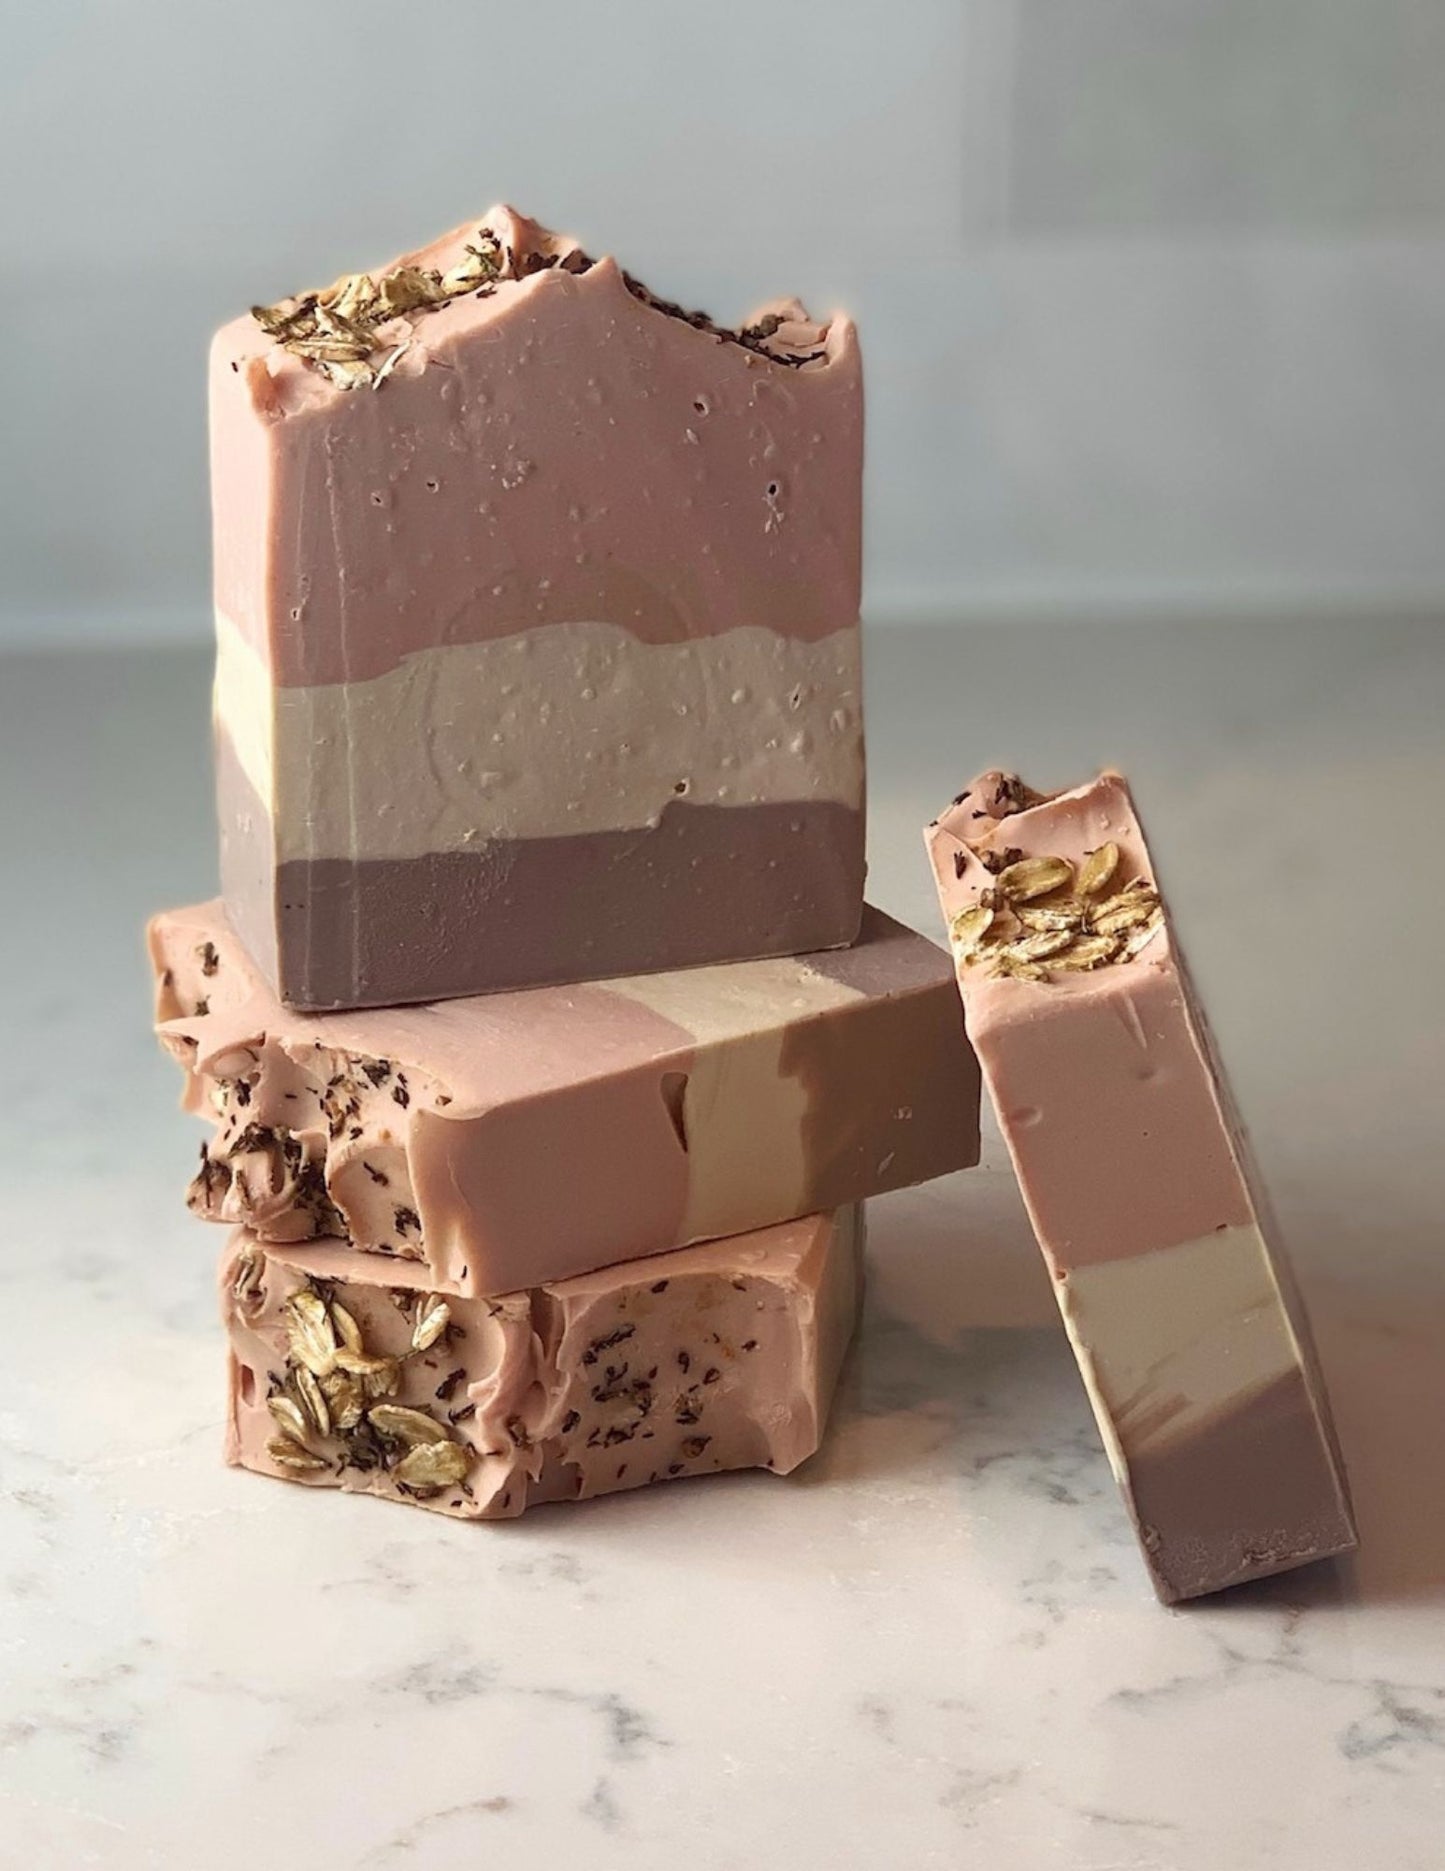 This handcrafted cold-processed soap is made with oat milk and natural clays. This lovely, oat-scented bar is extra creamy and produces a nice lather. A stack of three of these three color bars sits on a marble counter with another bar leaning against them. Made with Brazilian Purple Clay and Rose Clay for a pretty striped effect. Topped with Oats and Heather flowers. 